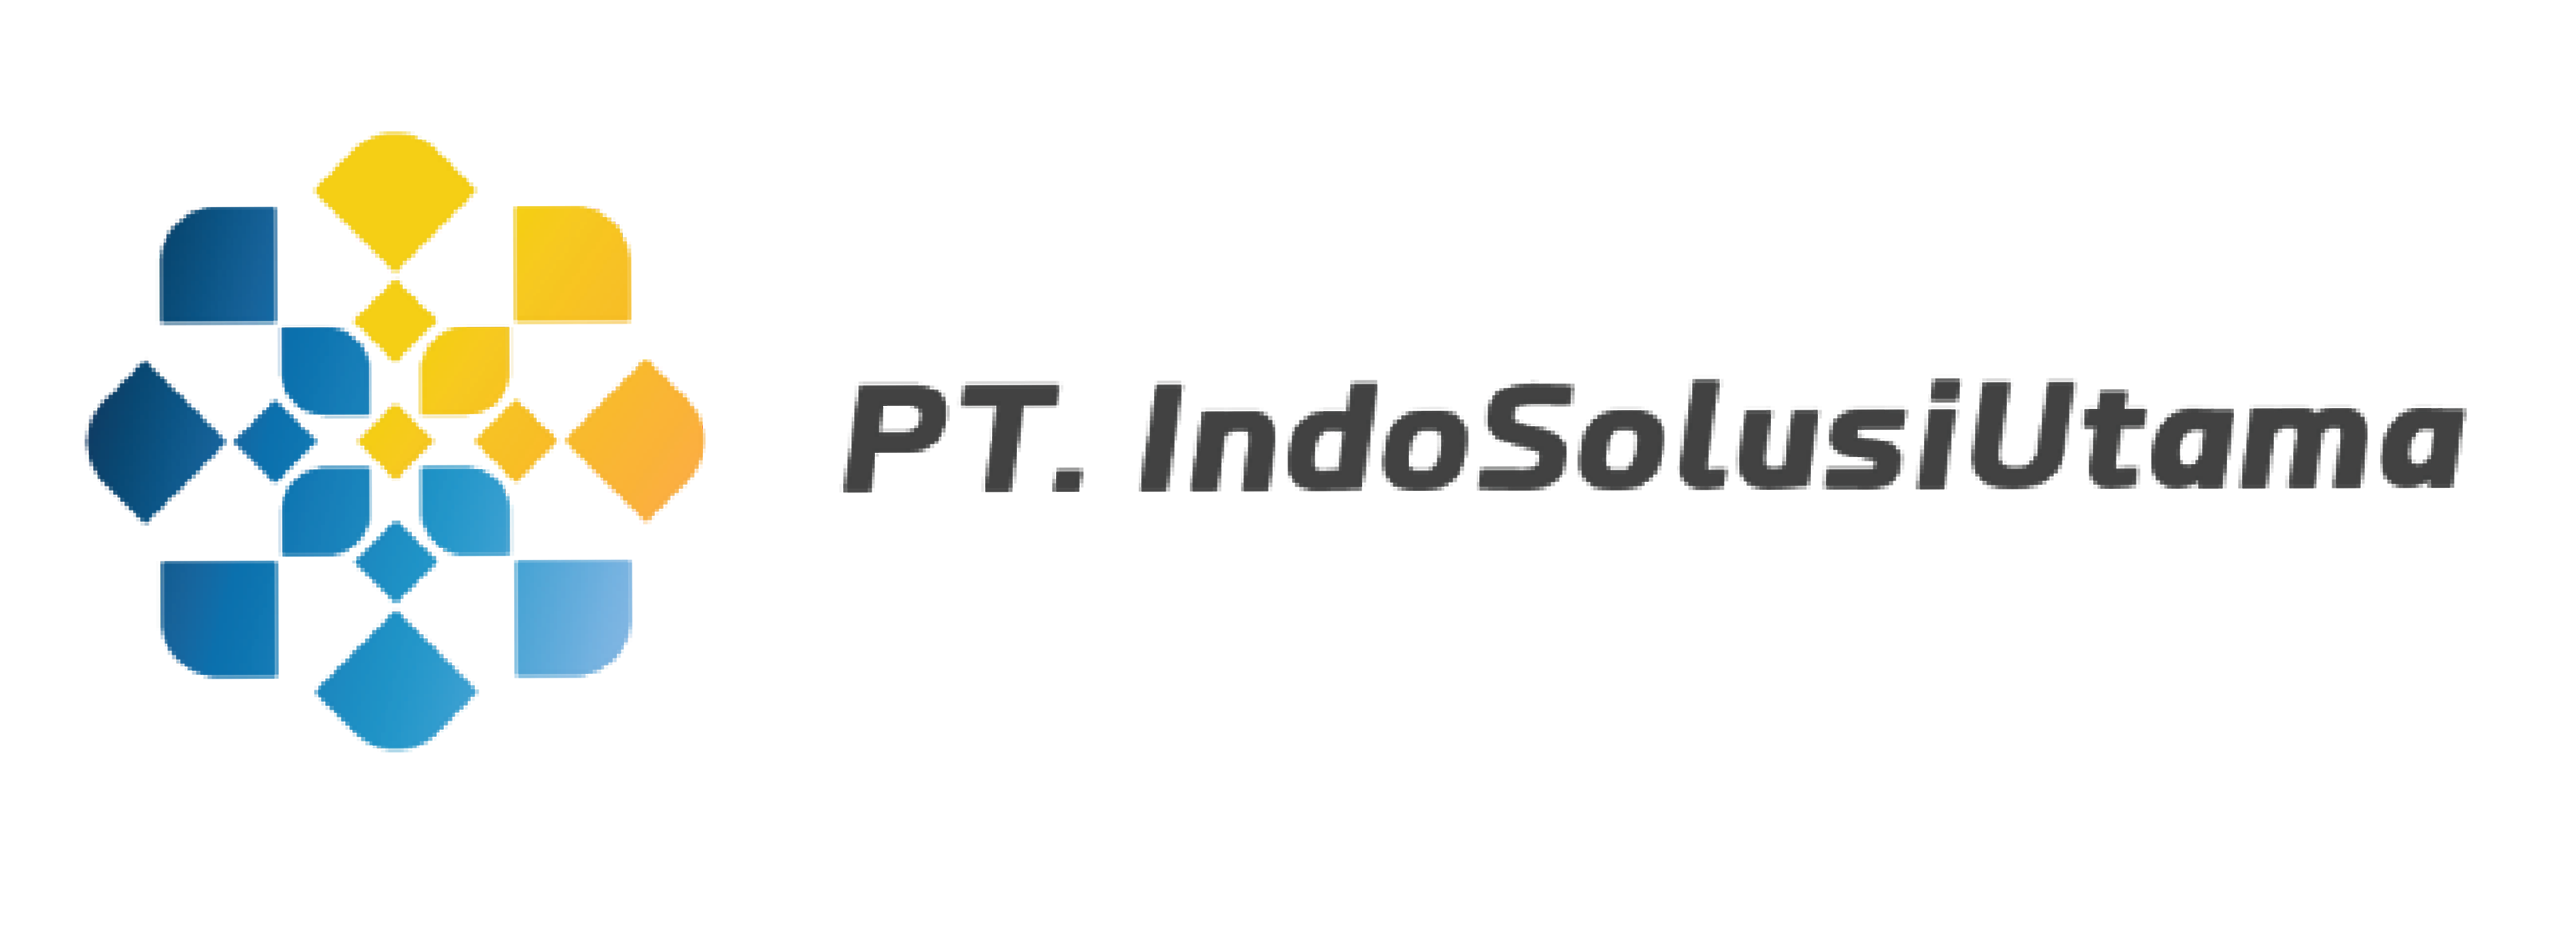 PT Indo Solusi Utama was established on December 12, 2013. INDOSOL engages in the provision of Independent Power Producer solution to Perusahaan Listrik Negara (PLN) in isolated areas. <br><br>Project: <br>IPP solar power plant 2 MWp Maumere-Ropa-Ende, Indonesia
